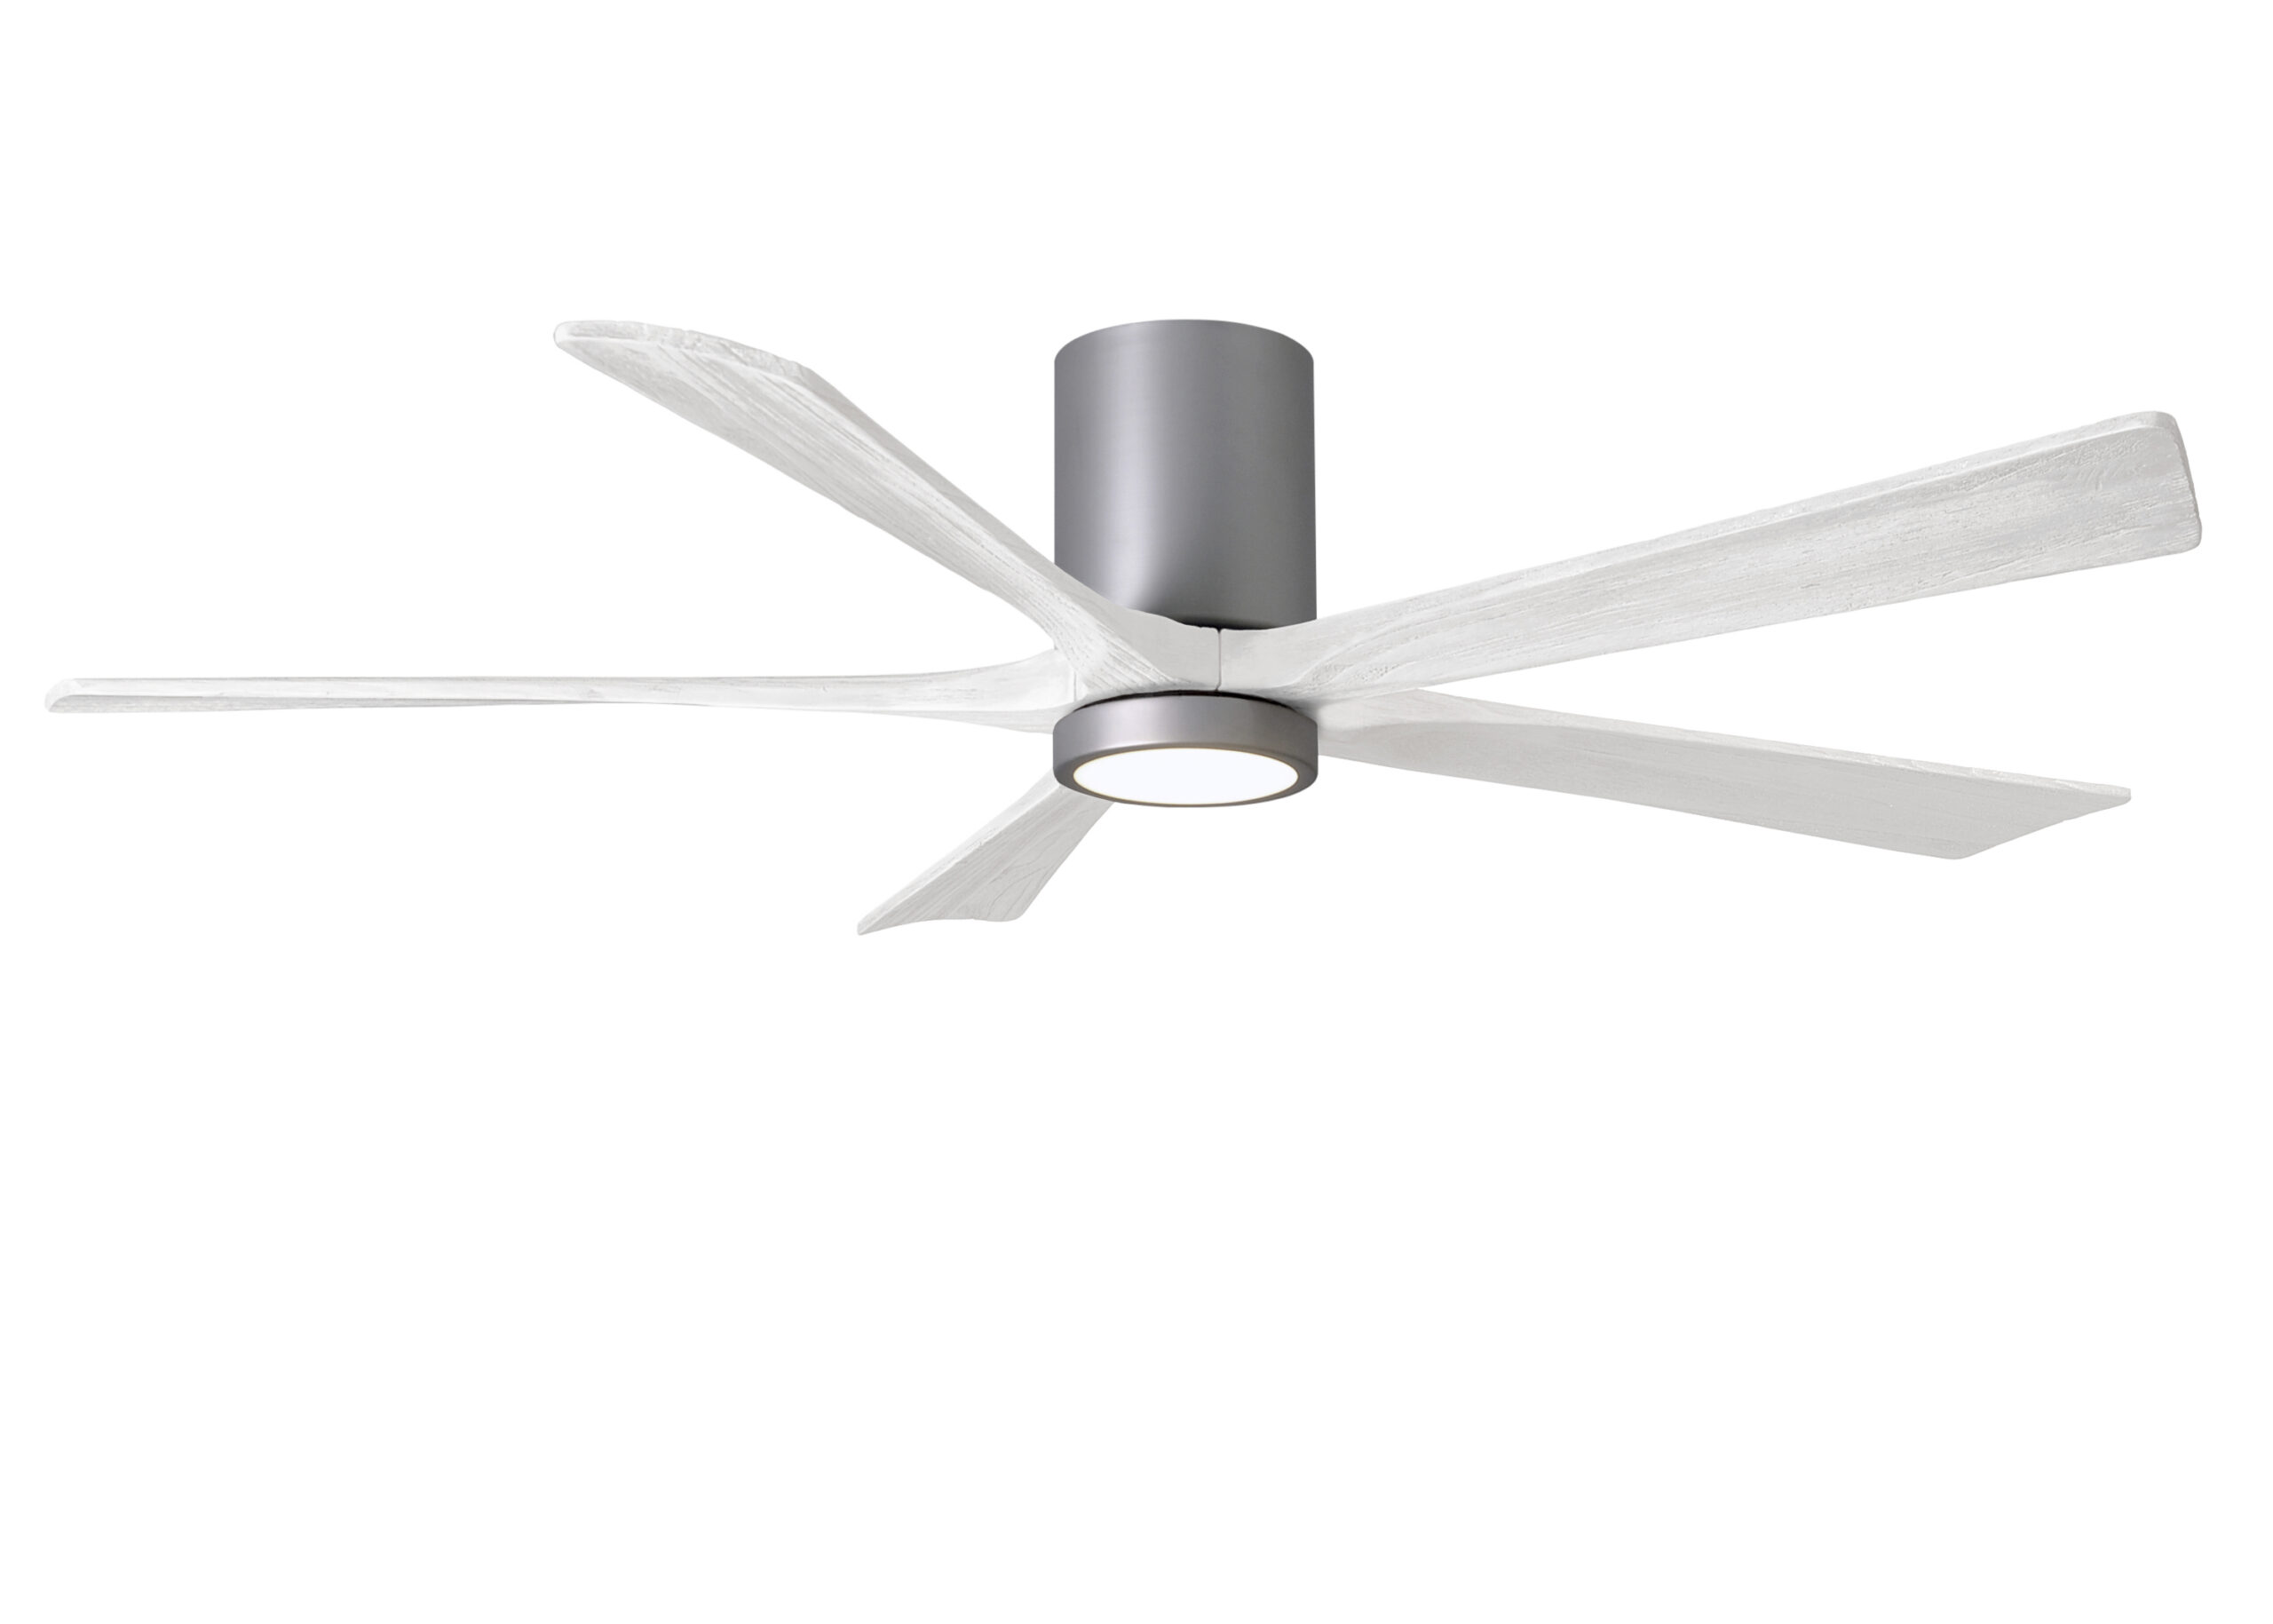 Irene-5HLK Ceiling Fan in Brushed Nickel Finish with 60